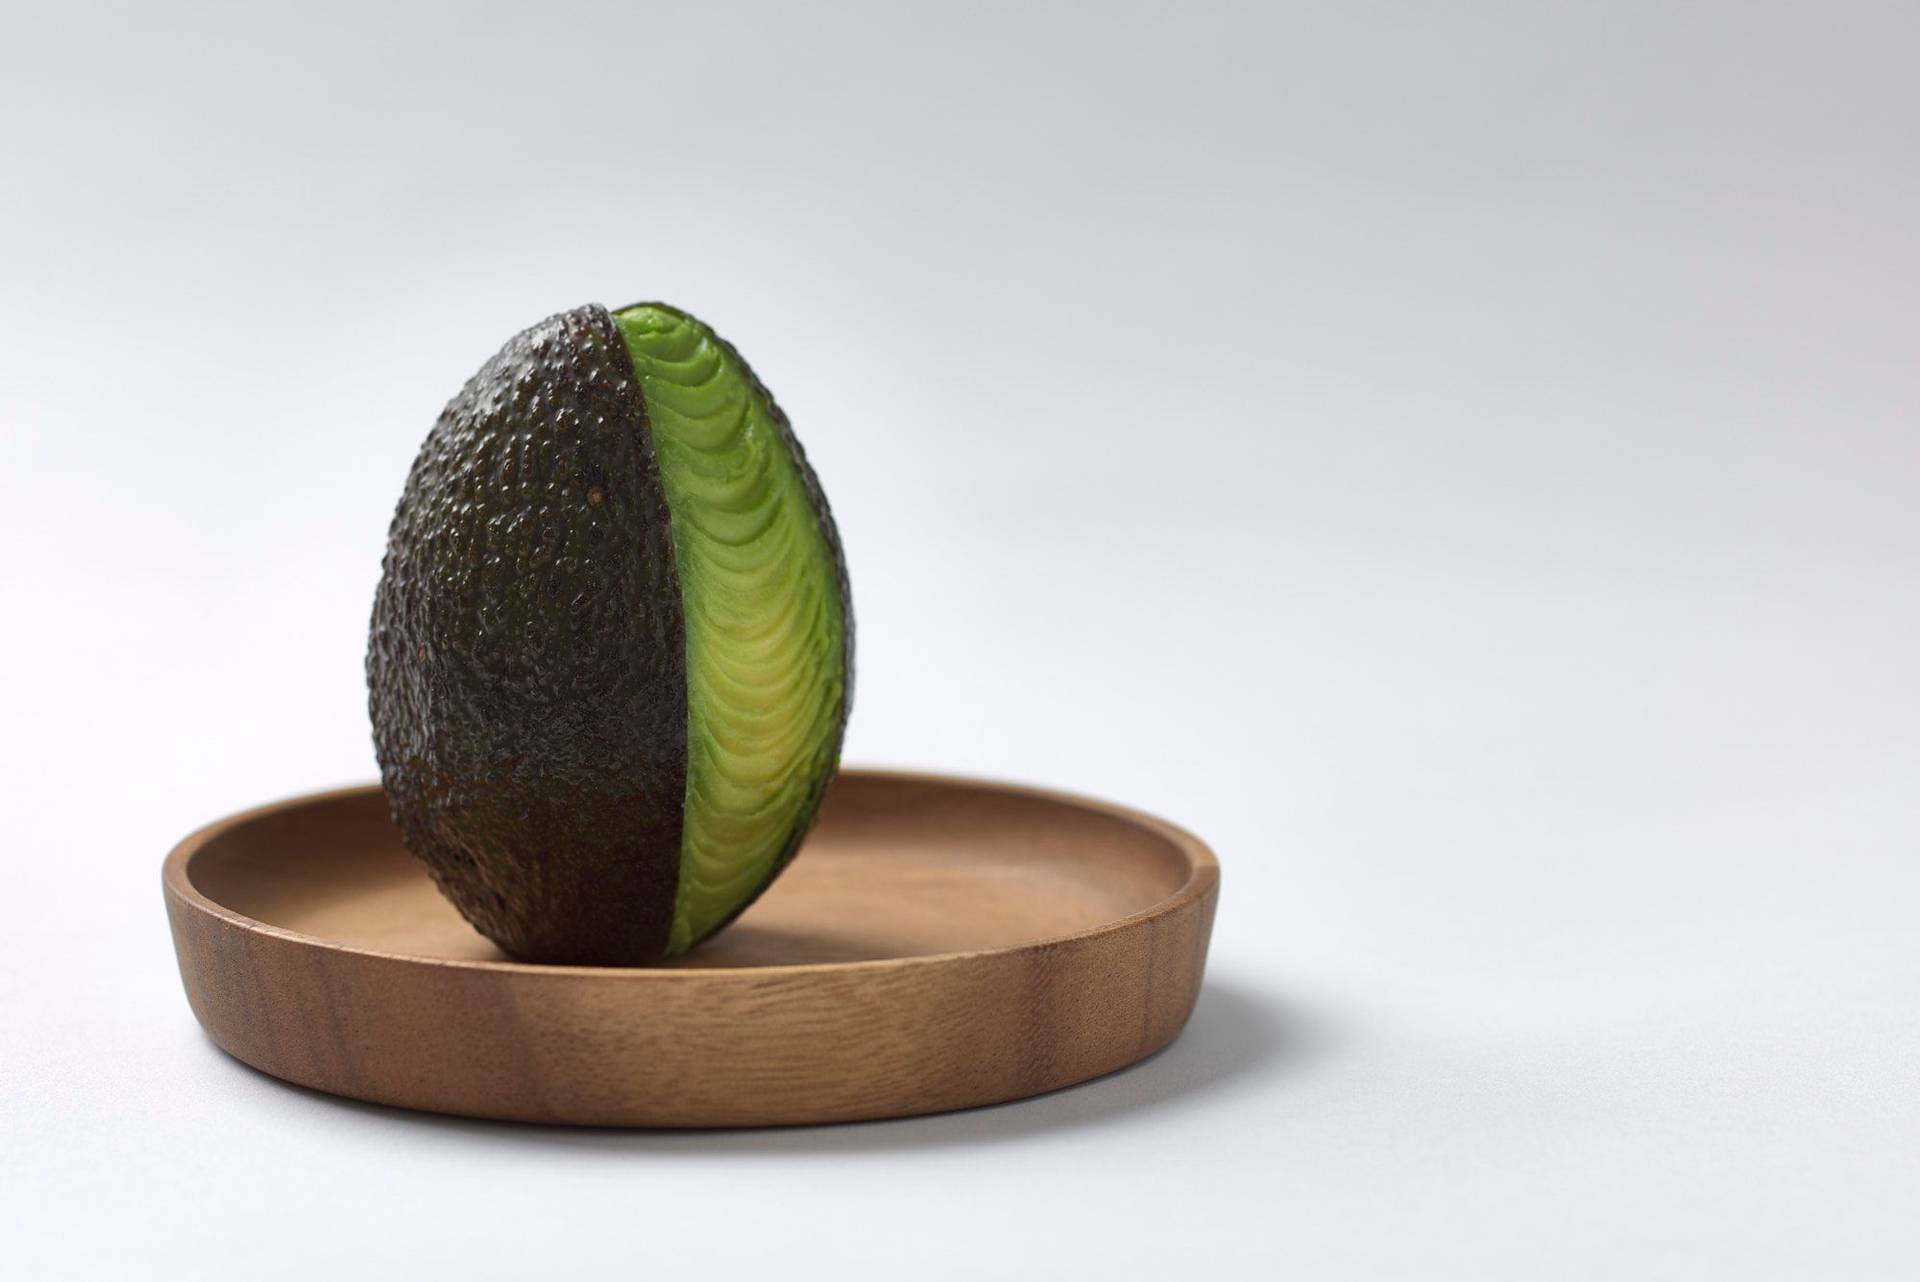 avocado on a wooden plate with white background